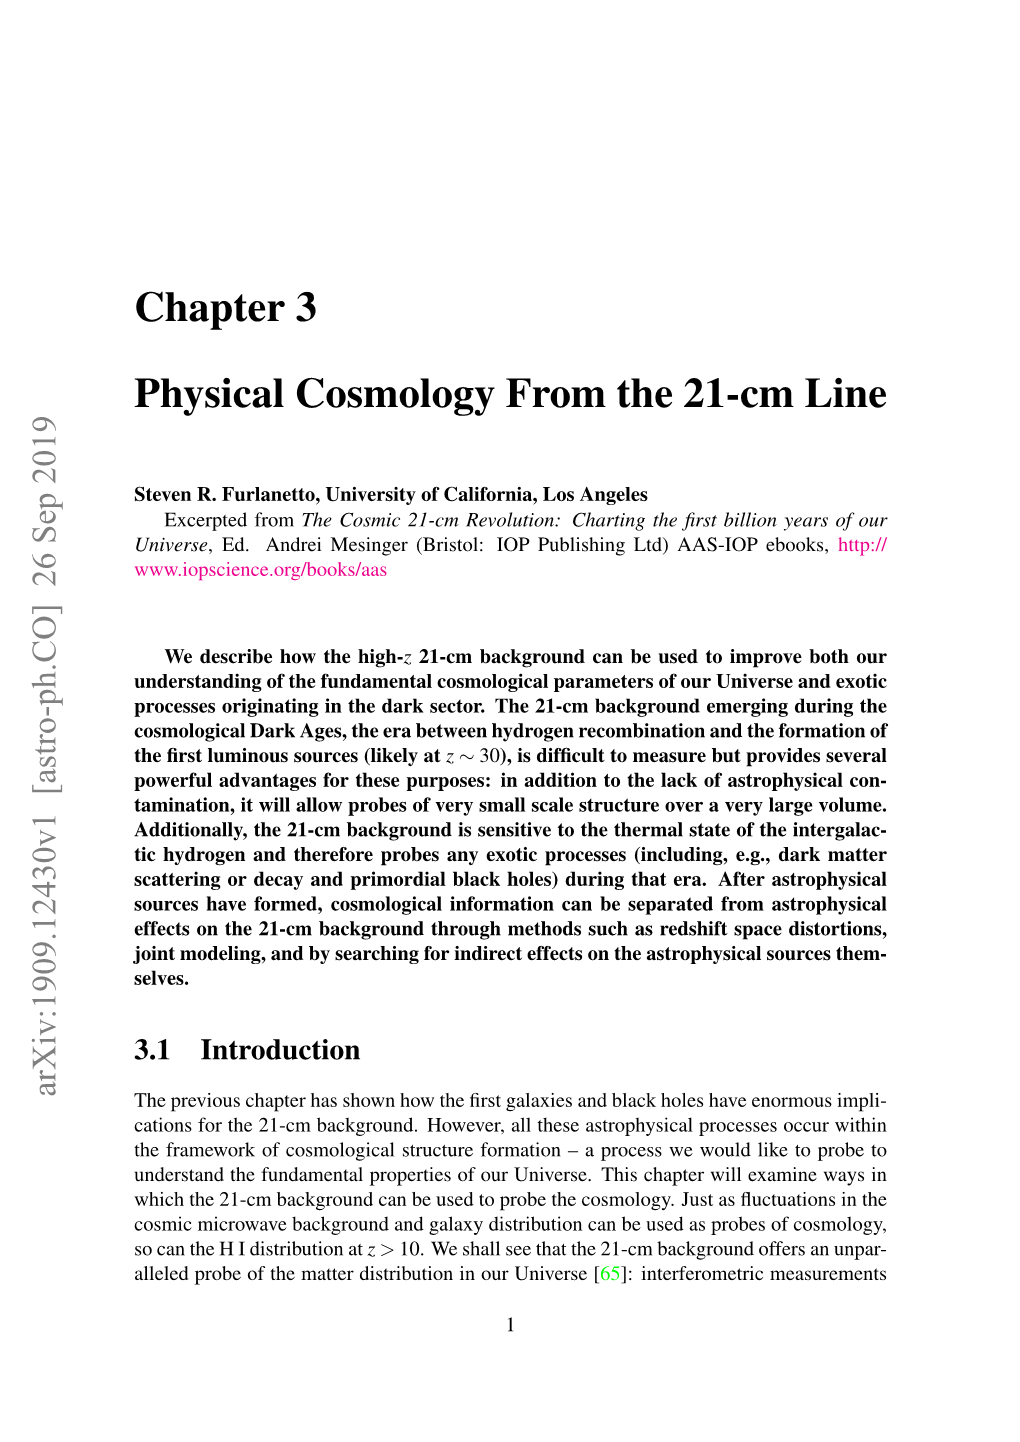 Chapter 3 Physical Cosmology from the 21-Cm Line